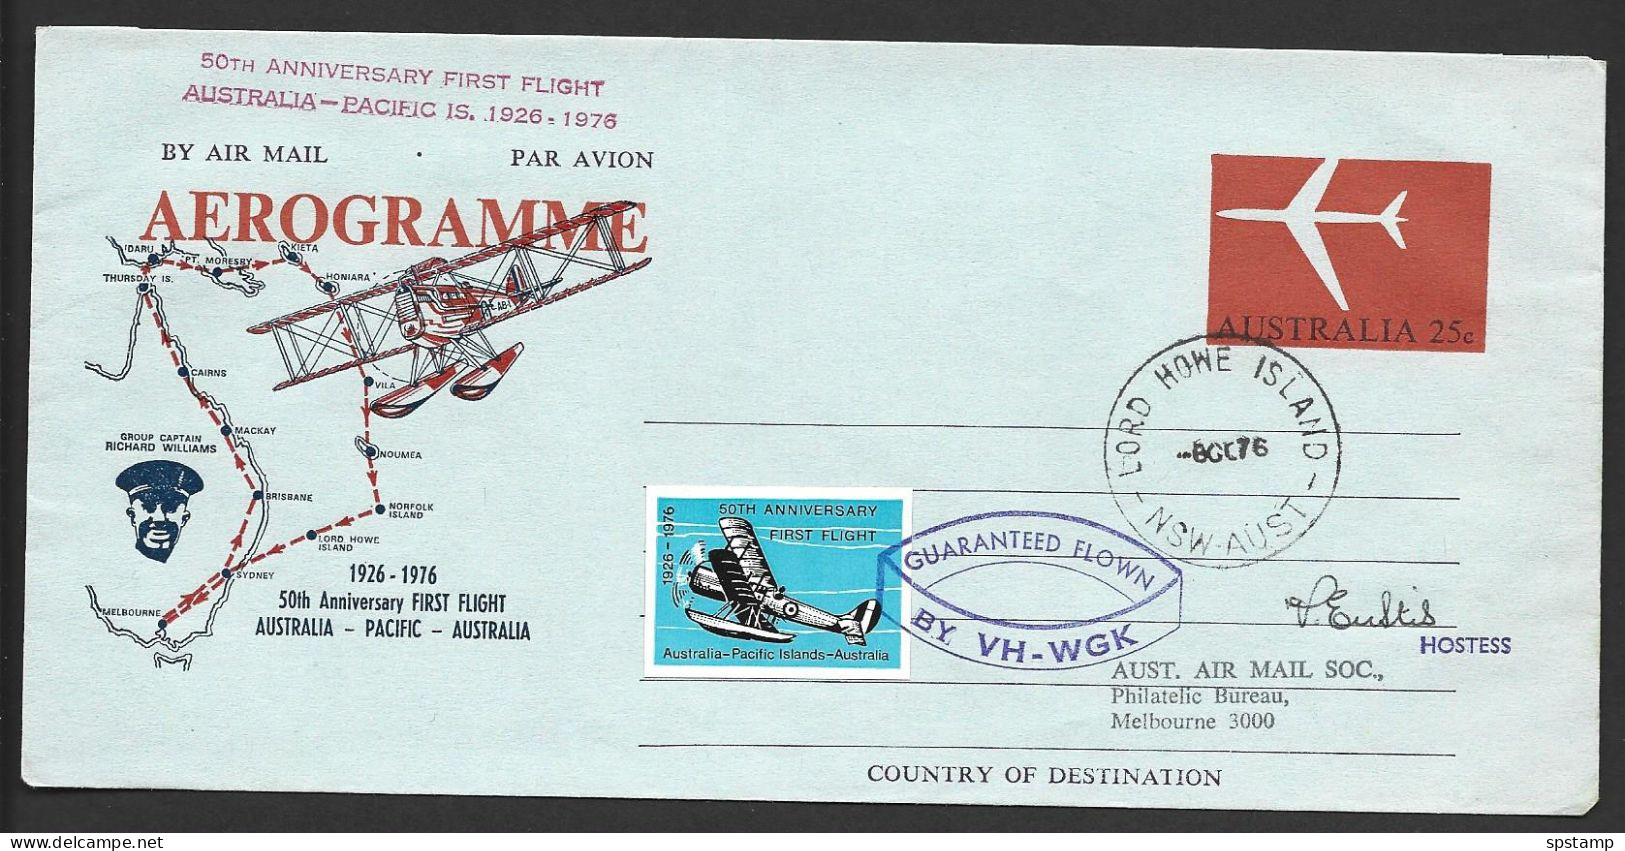 Australia 1976 Aerogramme Used Lord Howe Island To Melbourne, Carried On 1926 First Pacific RAAF Flight Re-enactment - Aerogramme